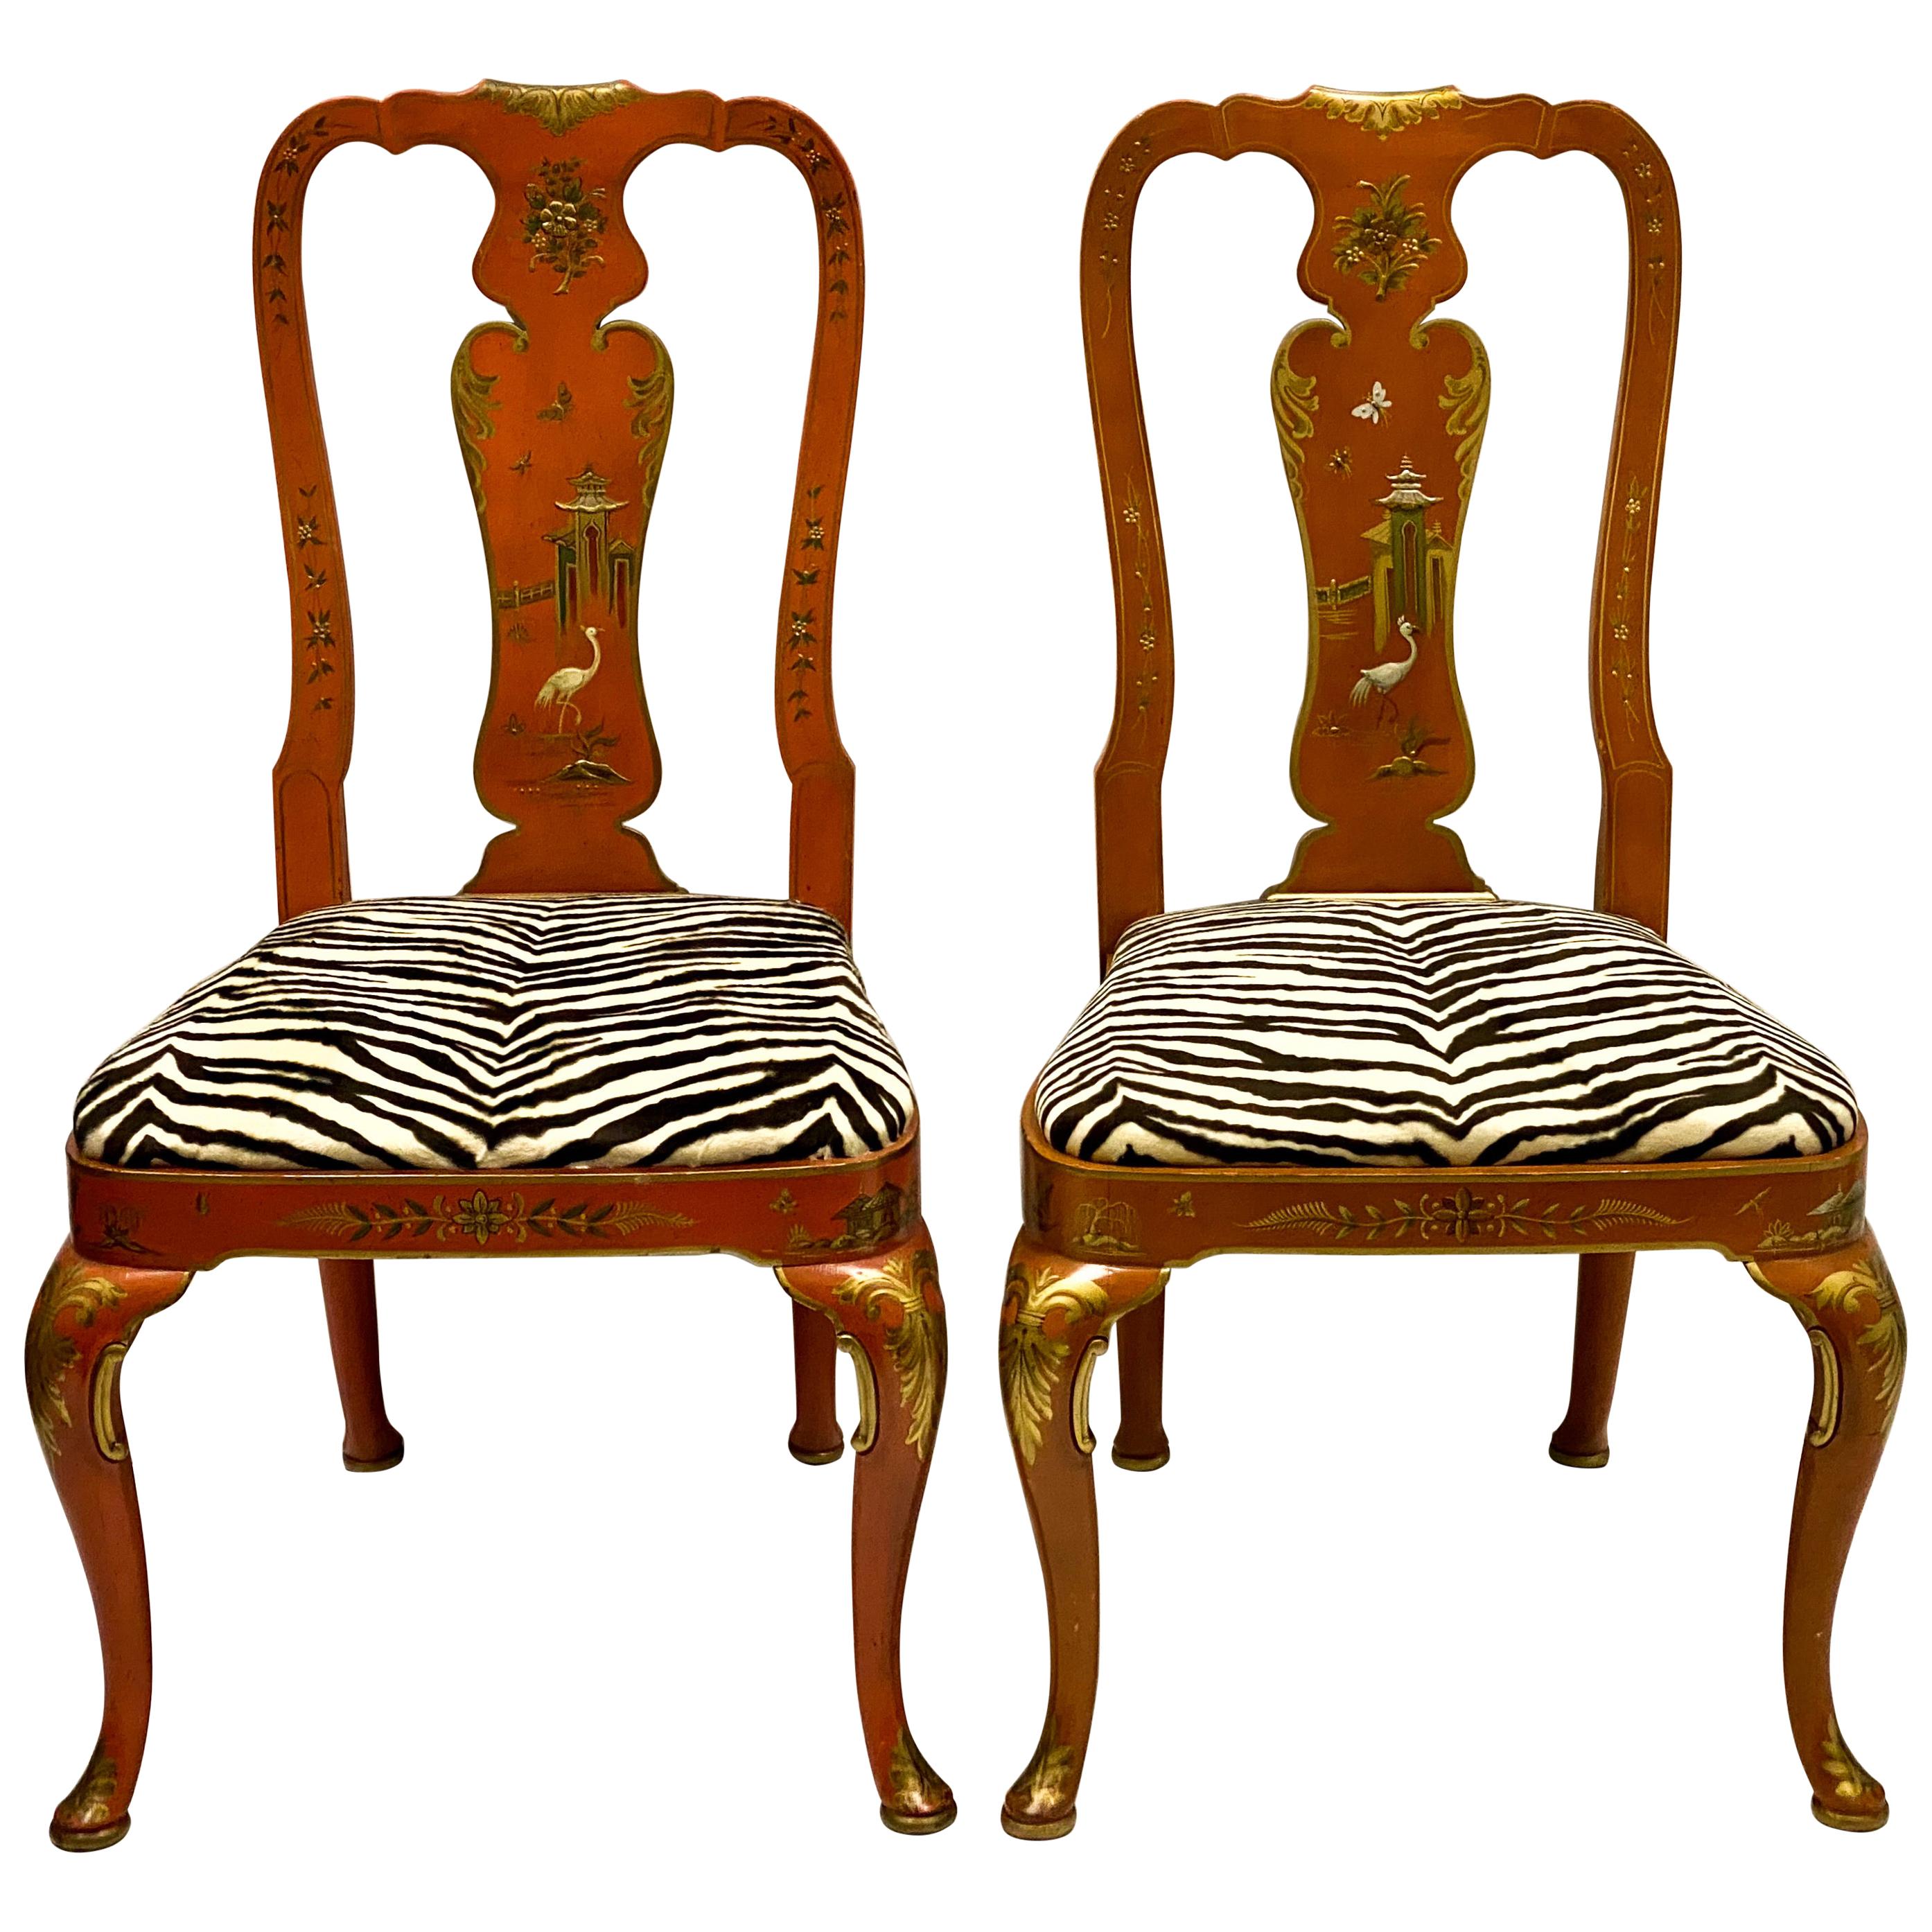 Orange Chinoiserie Queen Anne Side Chairs by Kindel Furniture, Pair